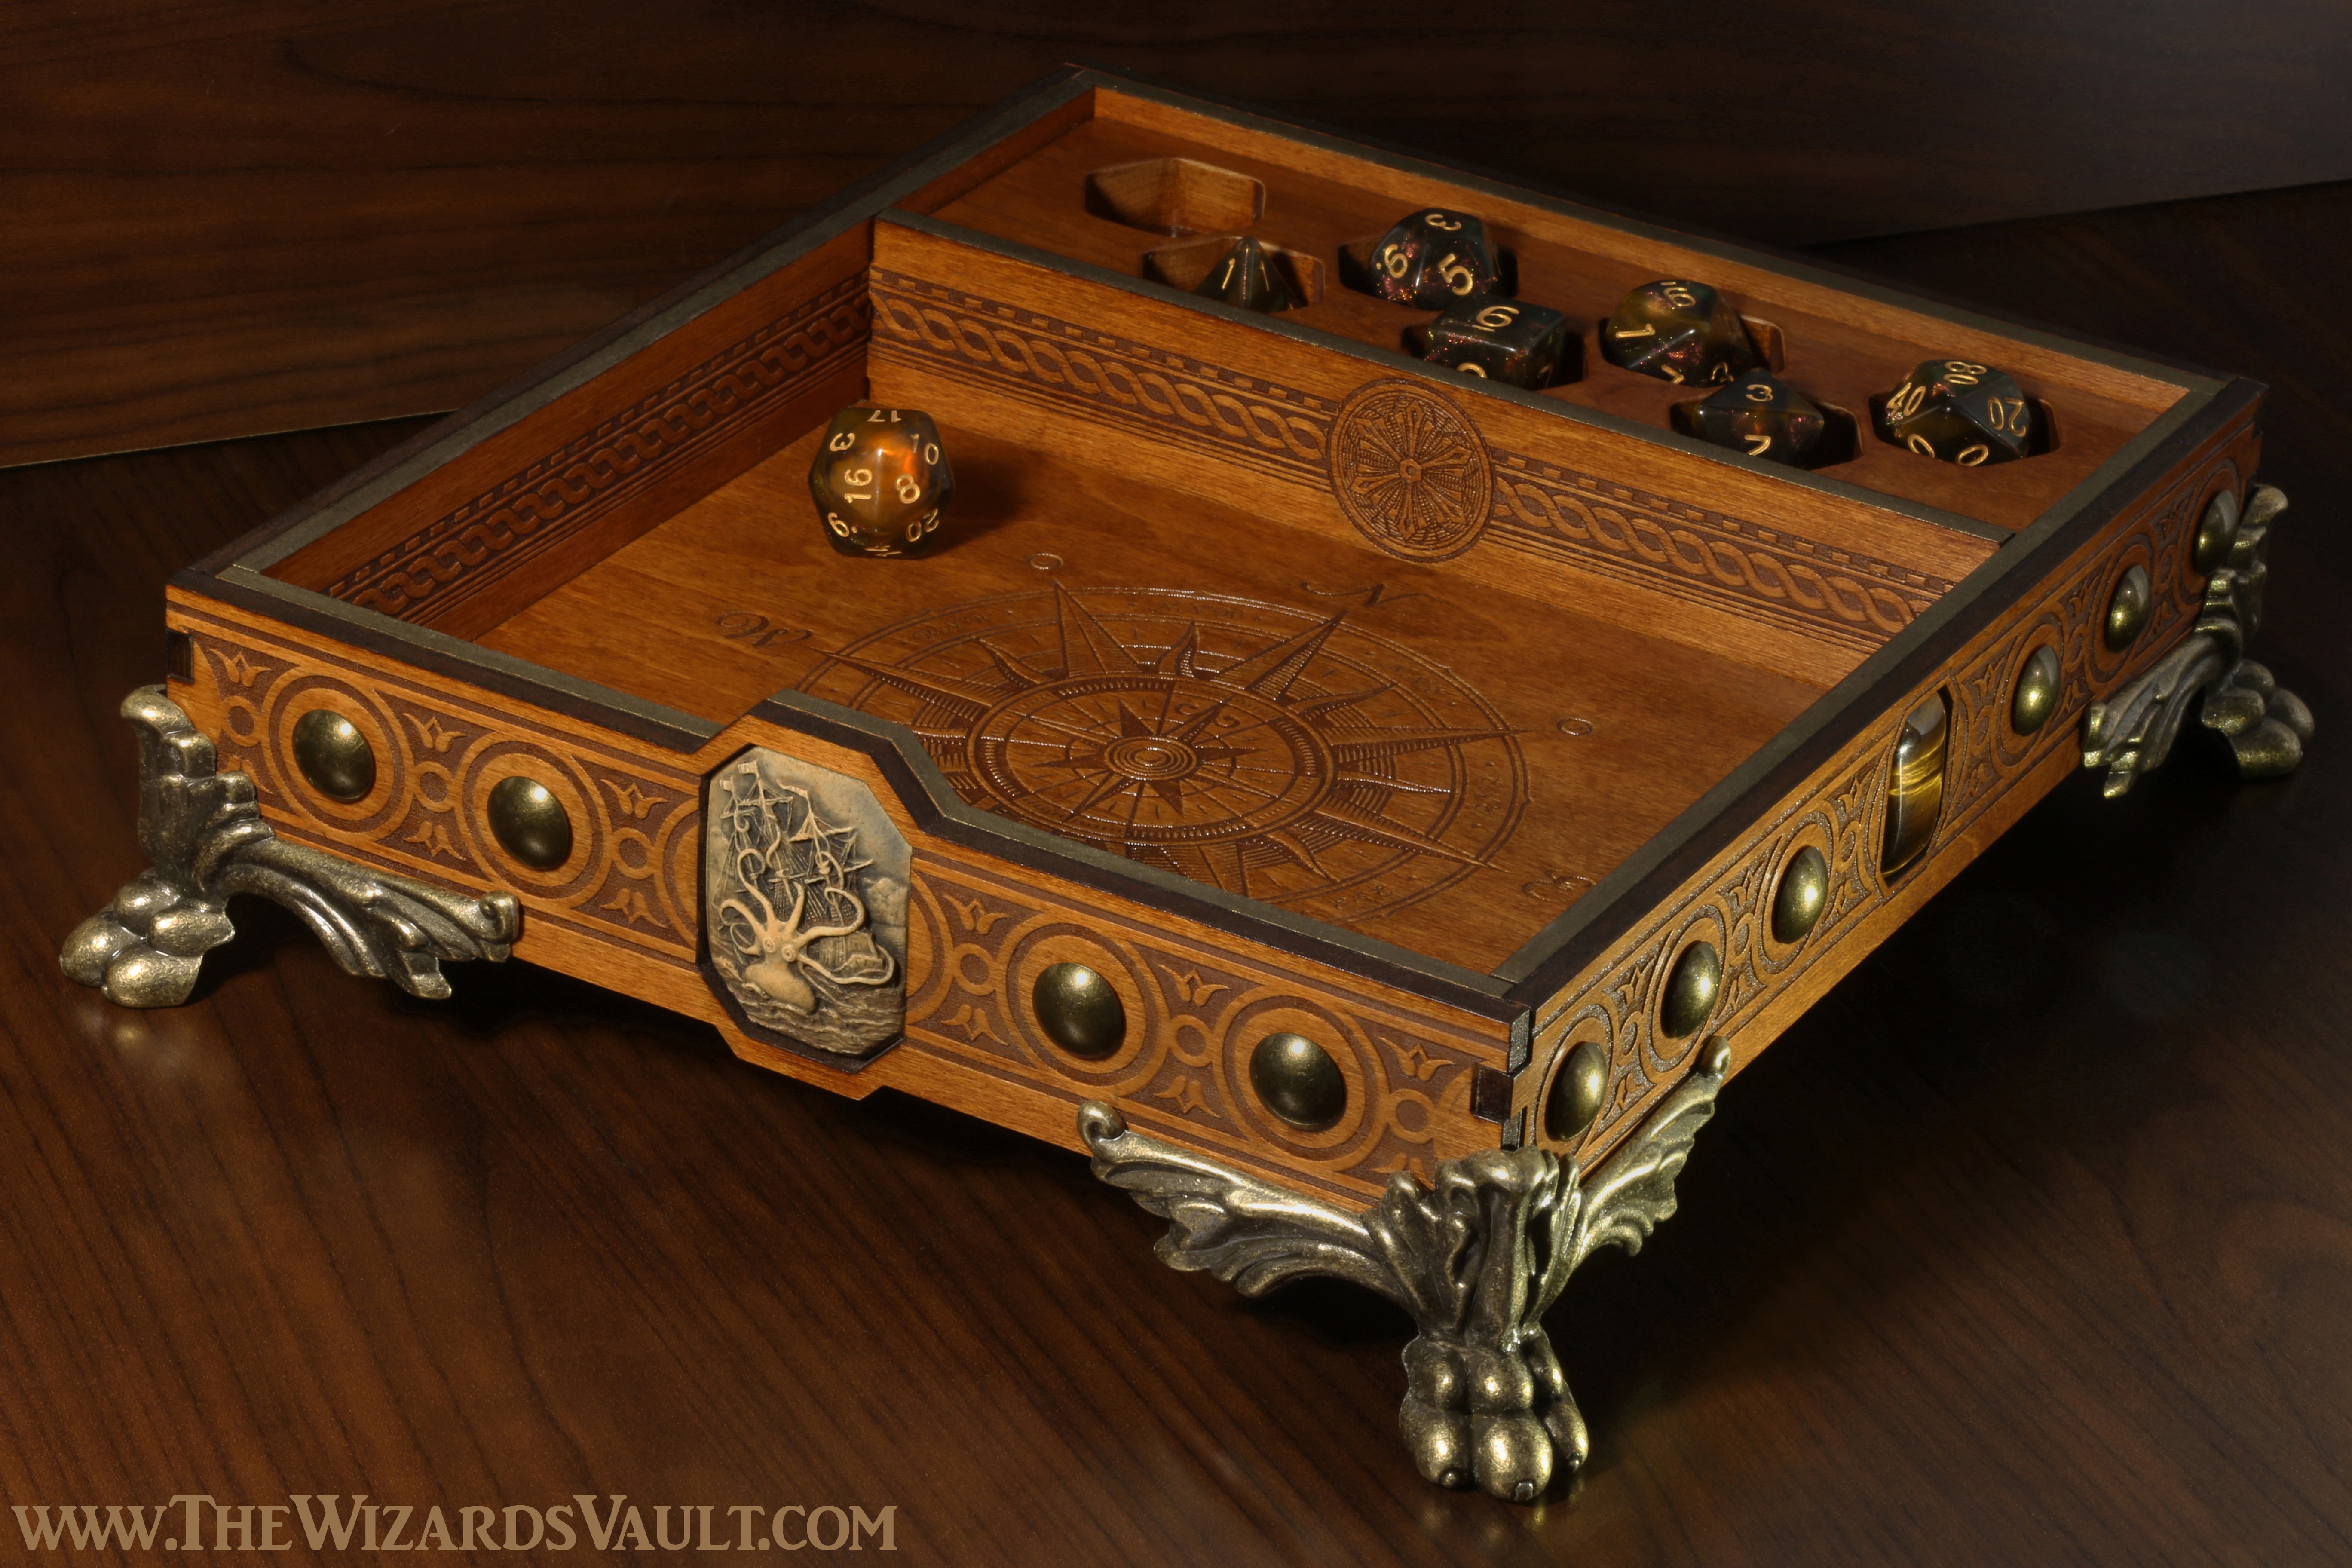 Seafarer's dice tray - The Wizard's Vault